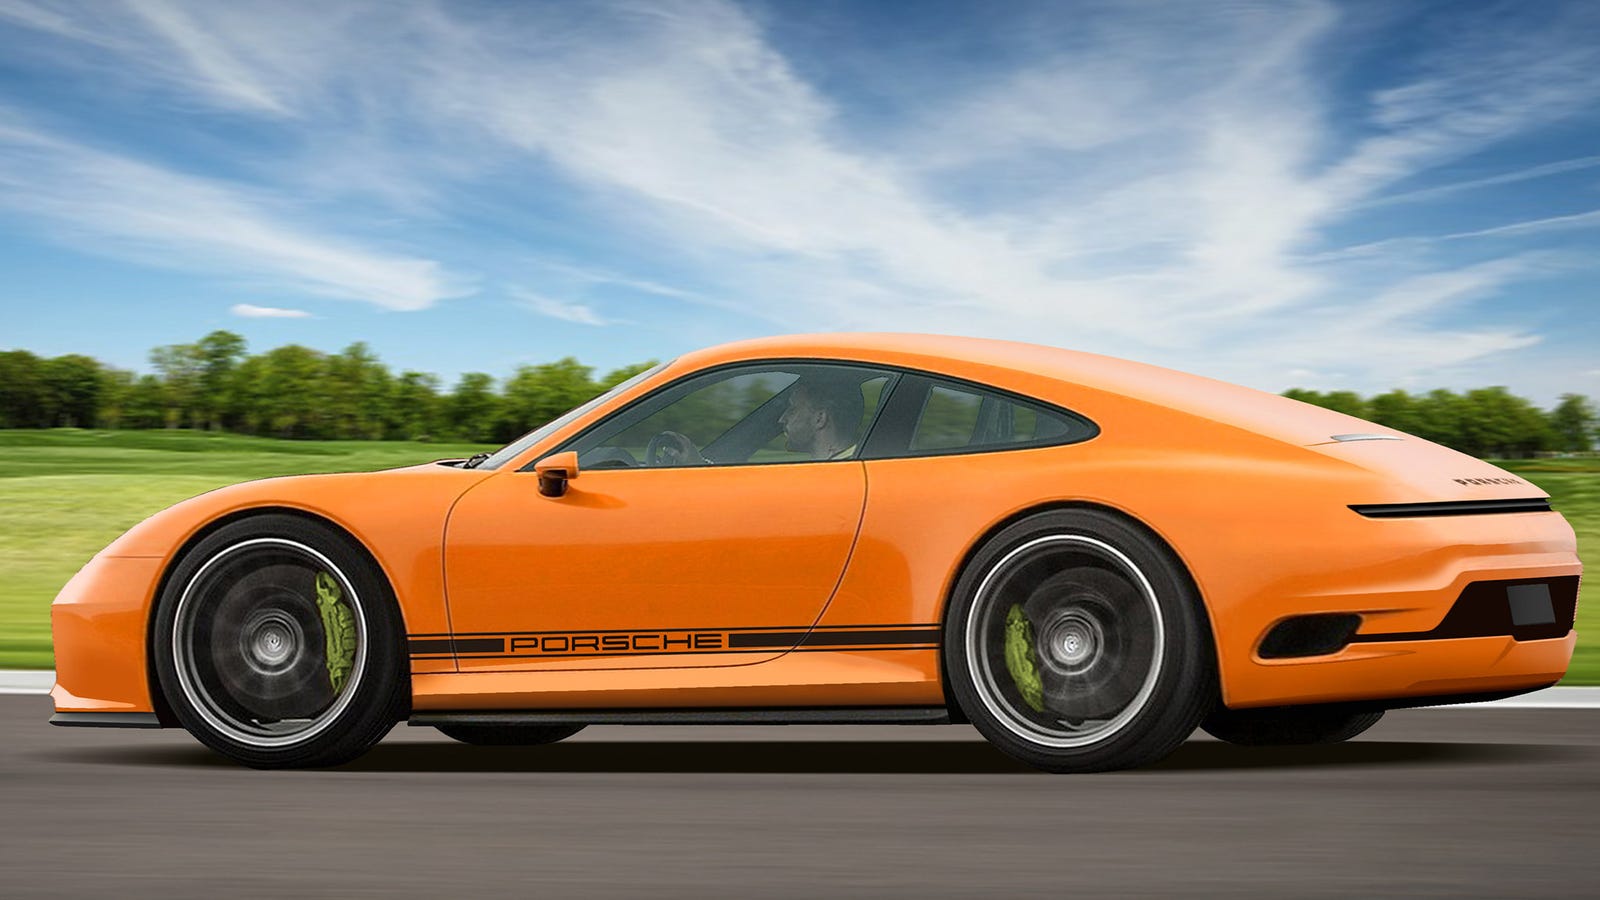 This Artist Imagines What A Future Electric Porsche 911 Could Look Like